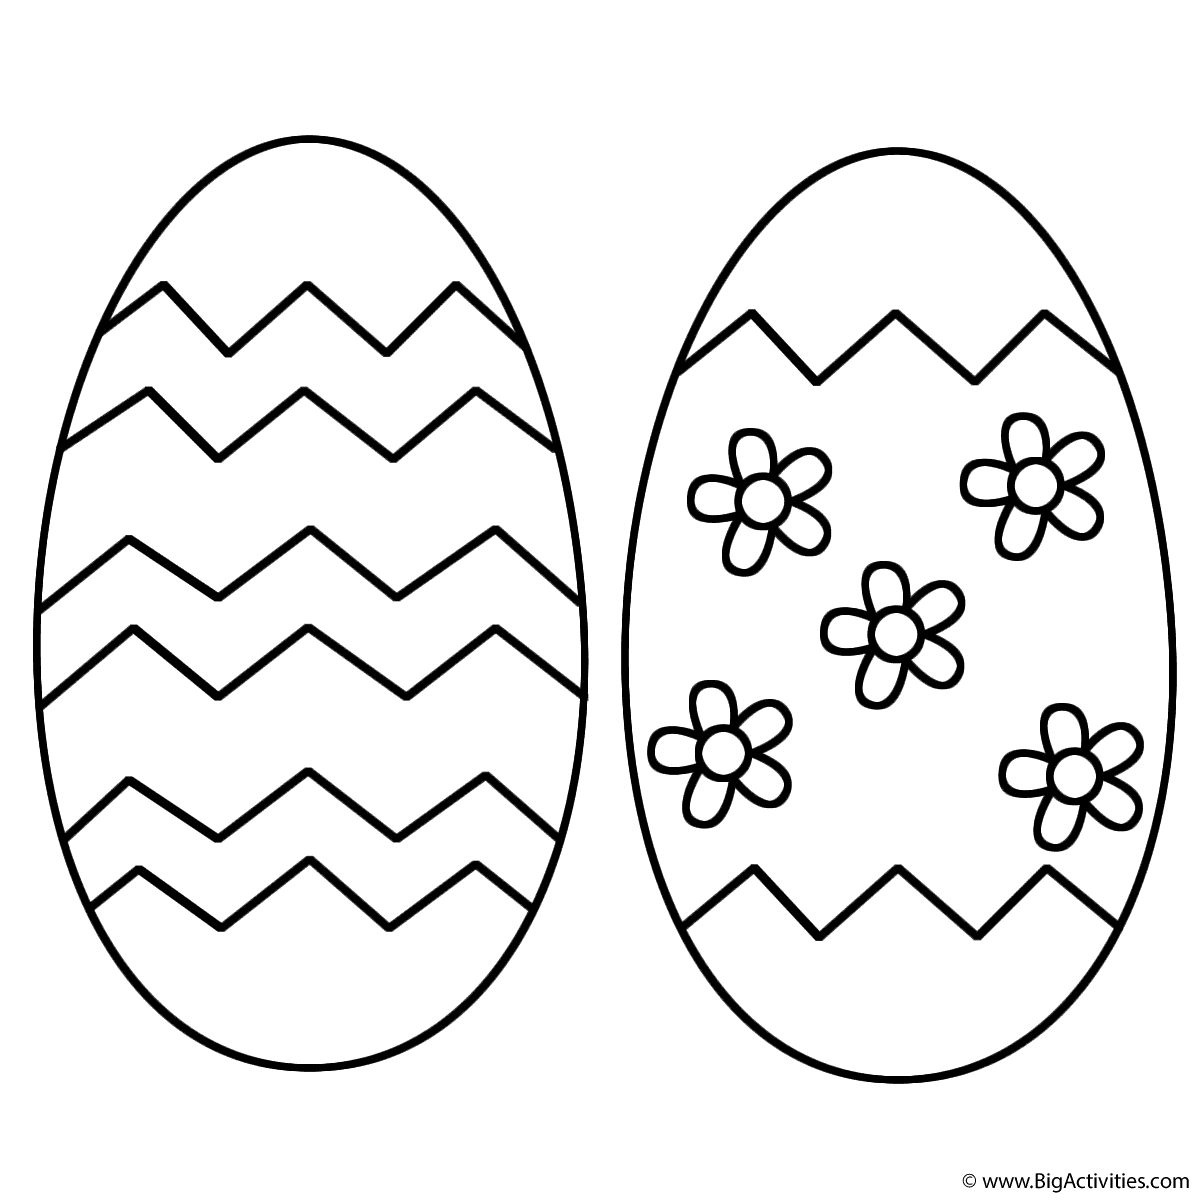 Download Two Easter Eggs with patterns and flowers - Coloring Page (Easter)